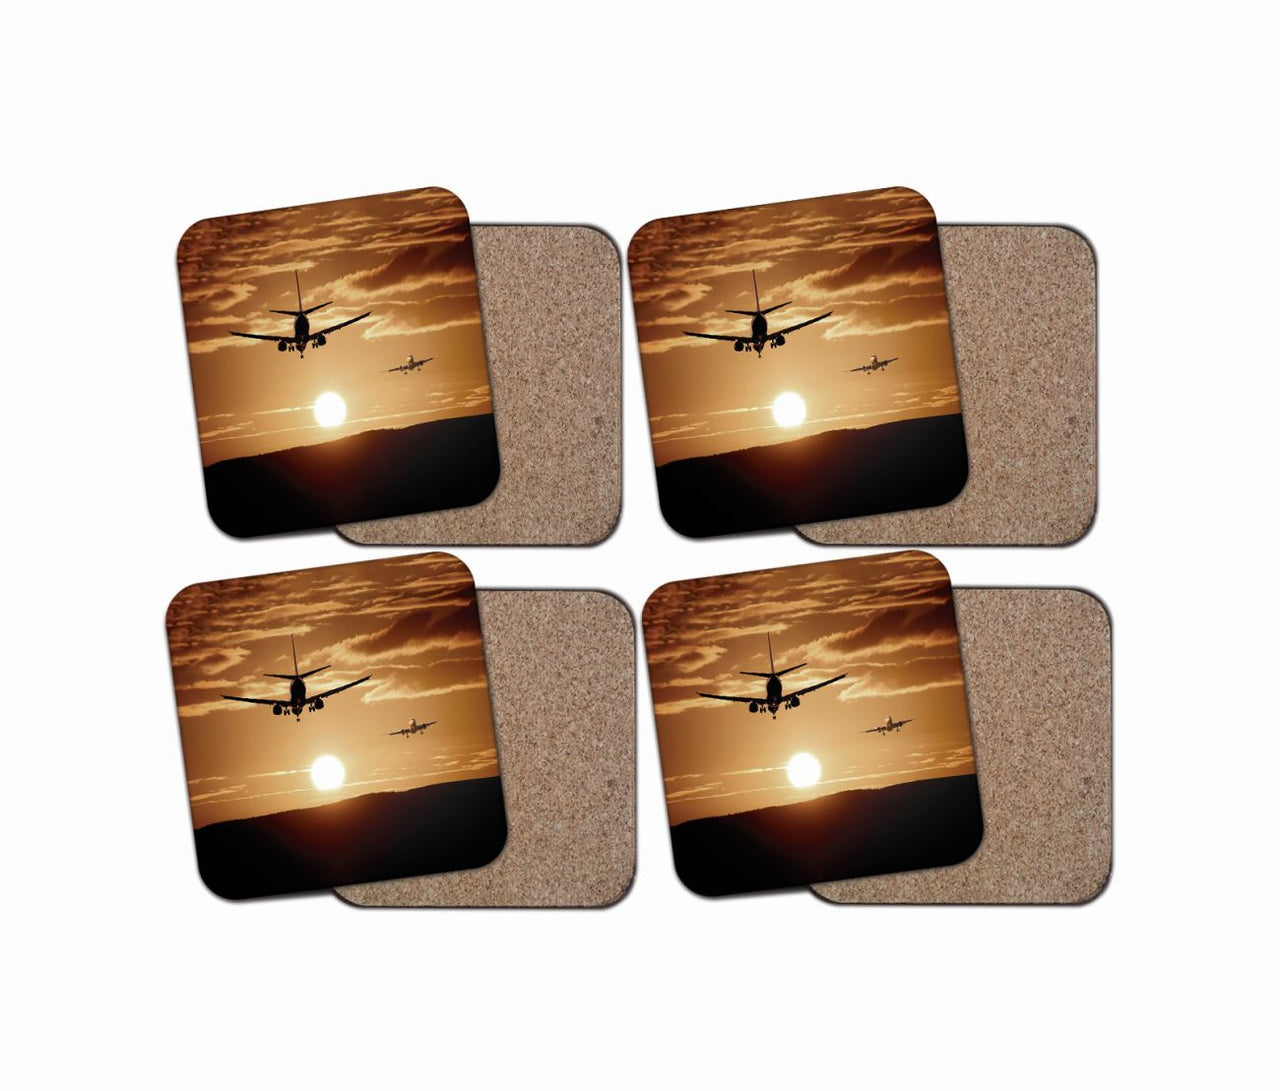 Two Aeroplanes During Sunset Designed Coasters